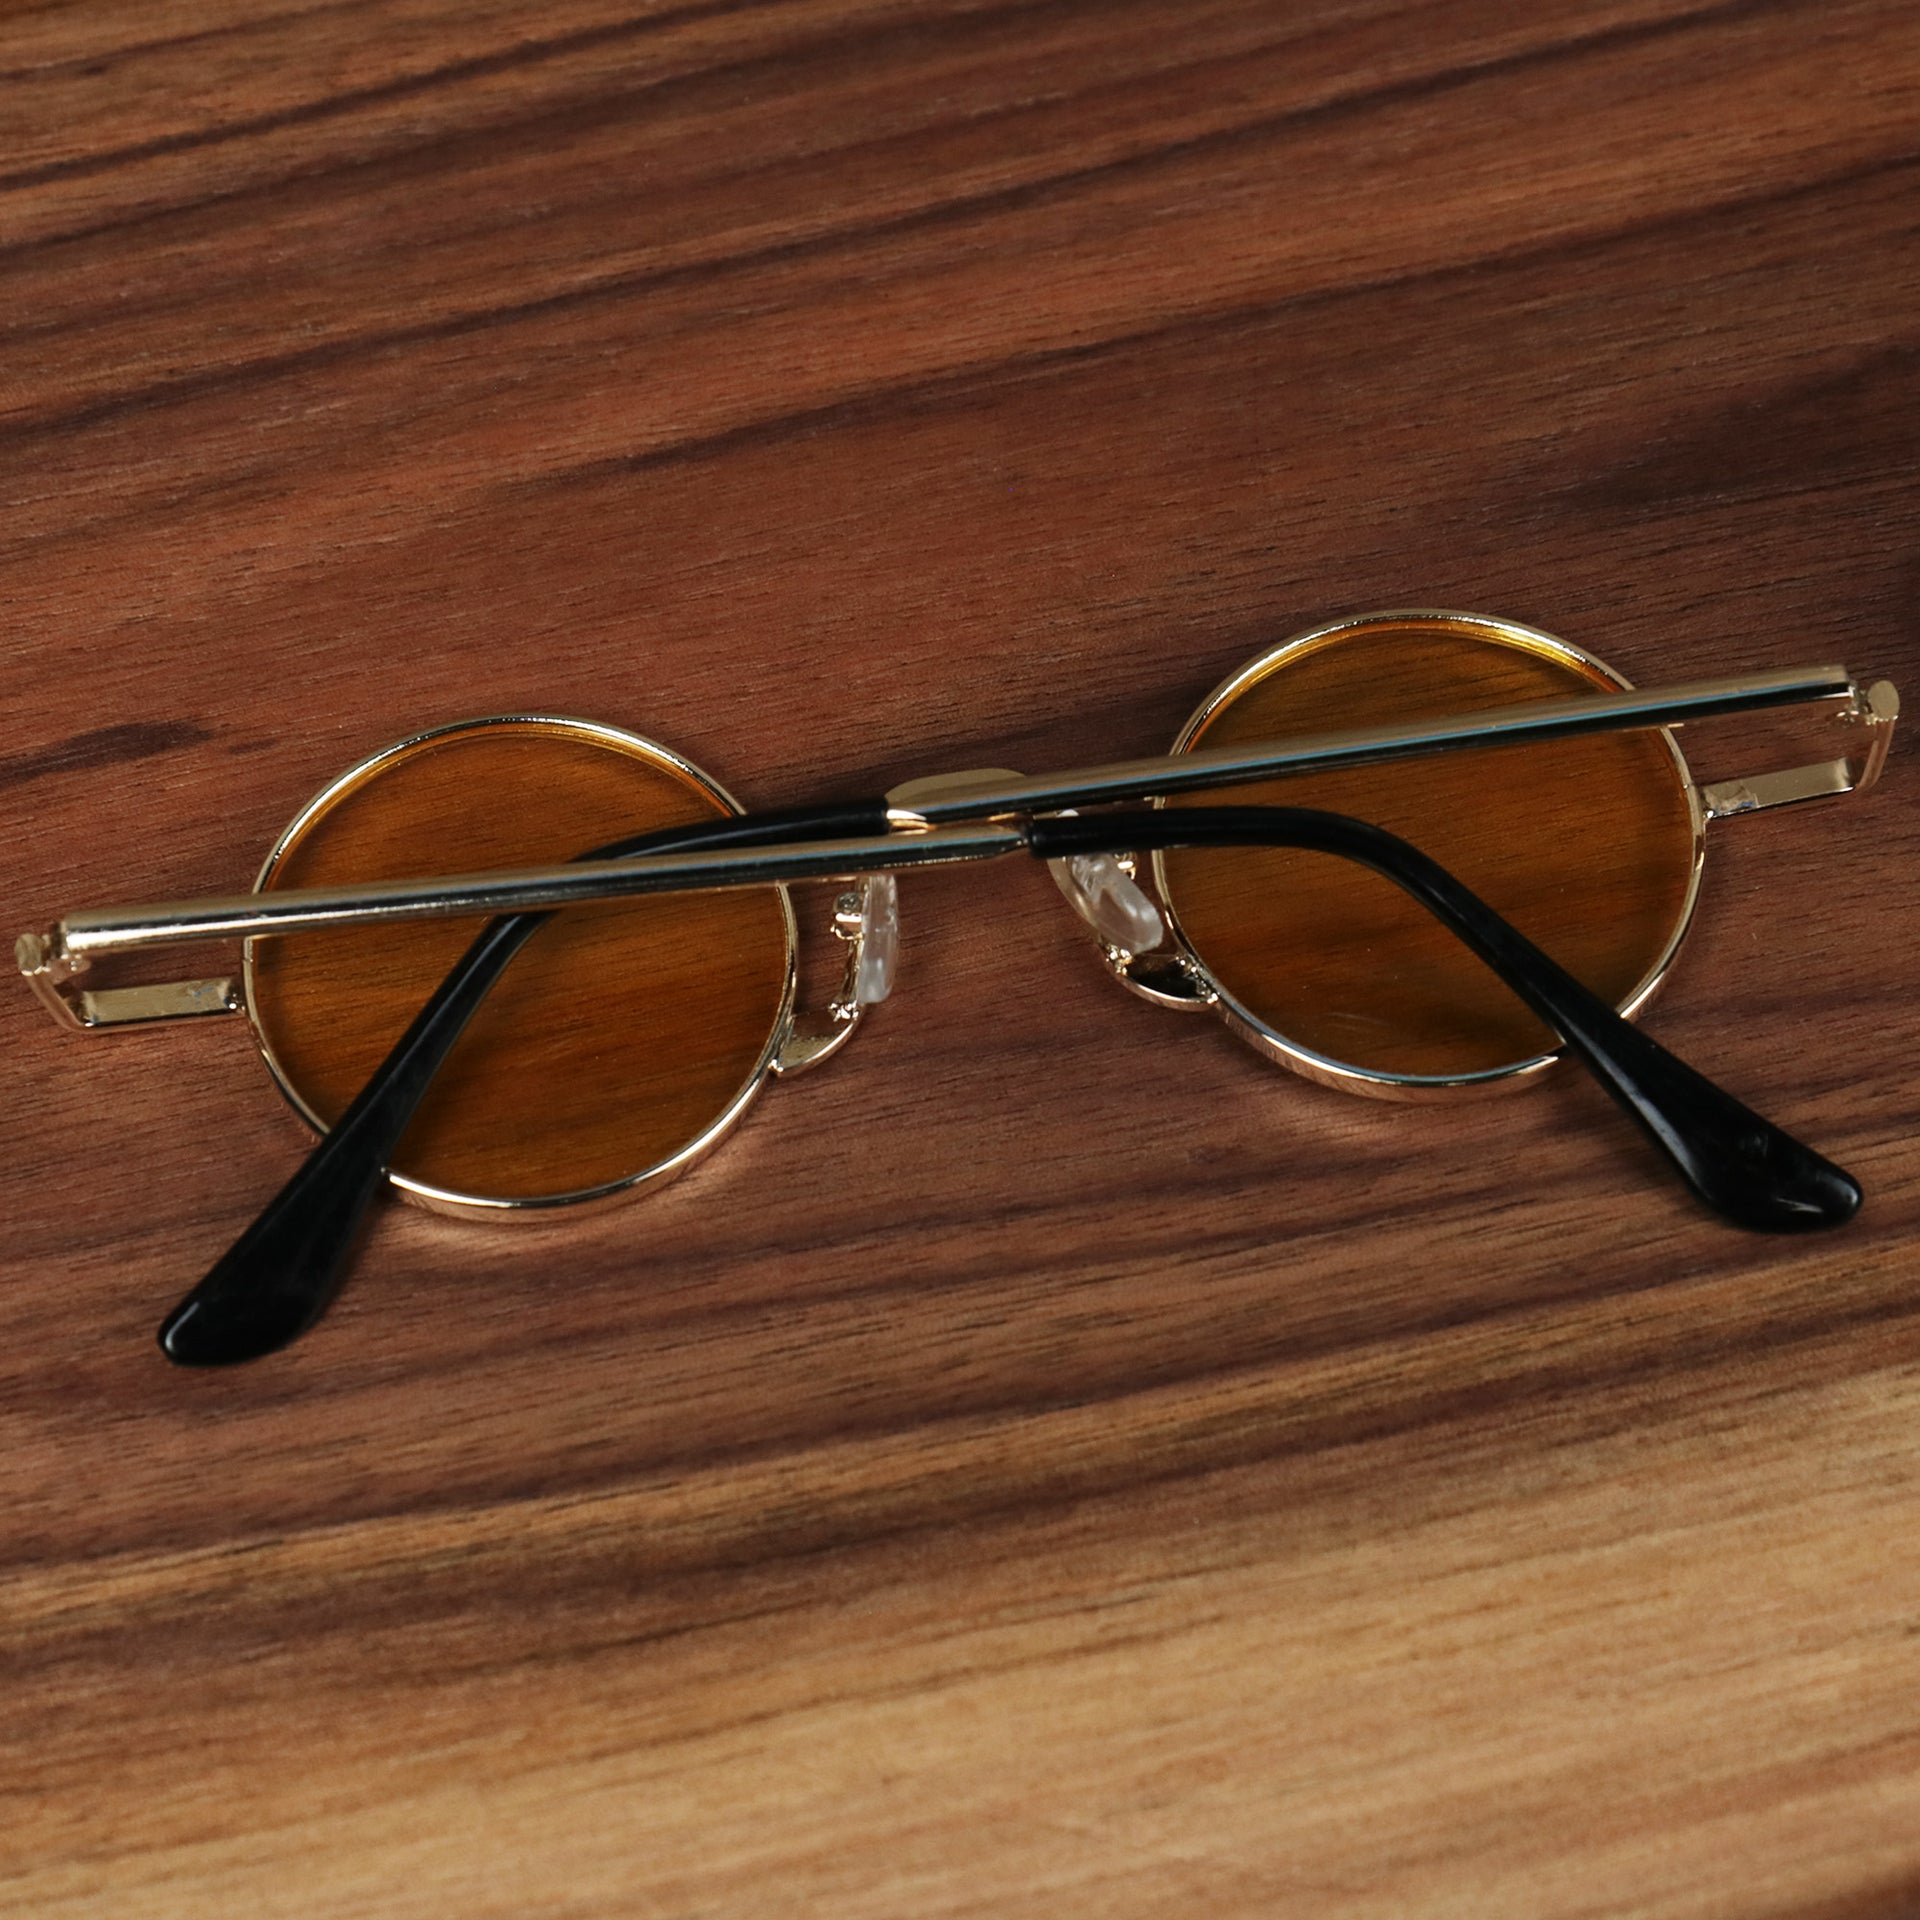 The Round Frames Yellow Lens Sunglasses with Gold Frame folded up